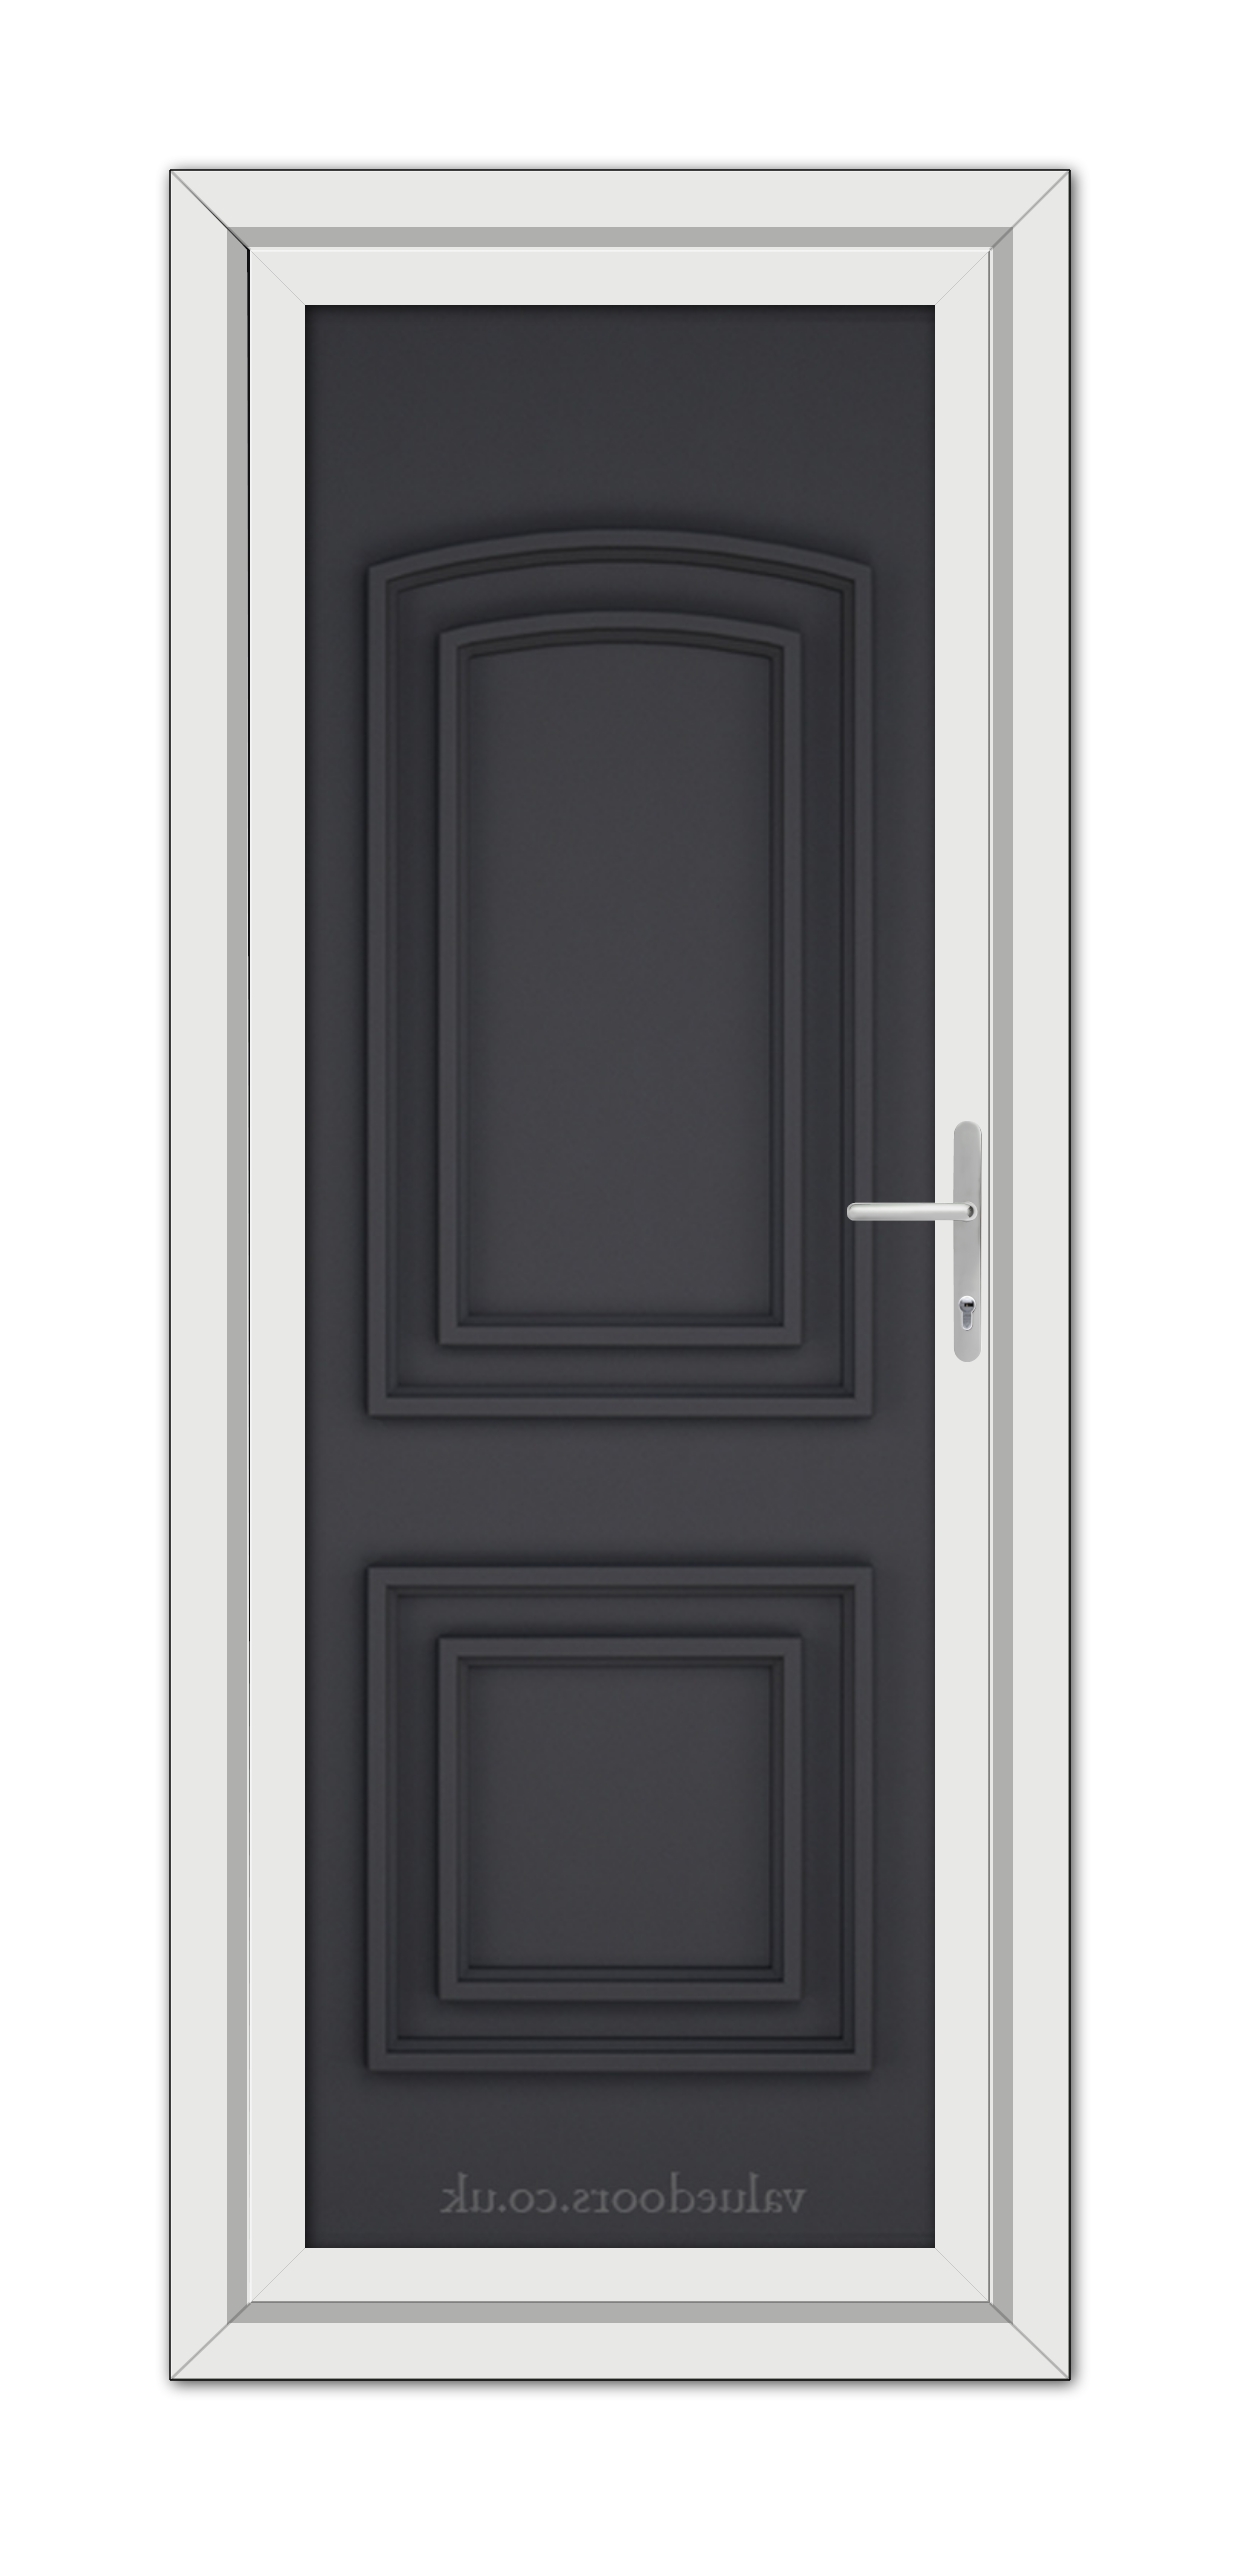 A modern grey Balmoral Solid uPVC door with a vertical handle set in a white frame, seen from the front.